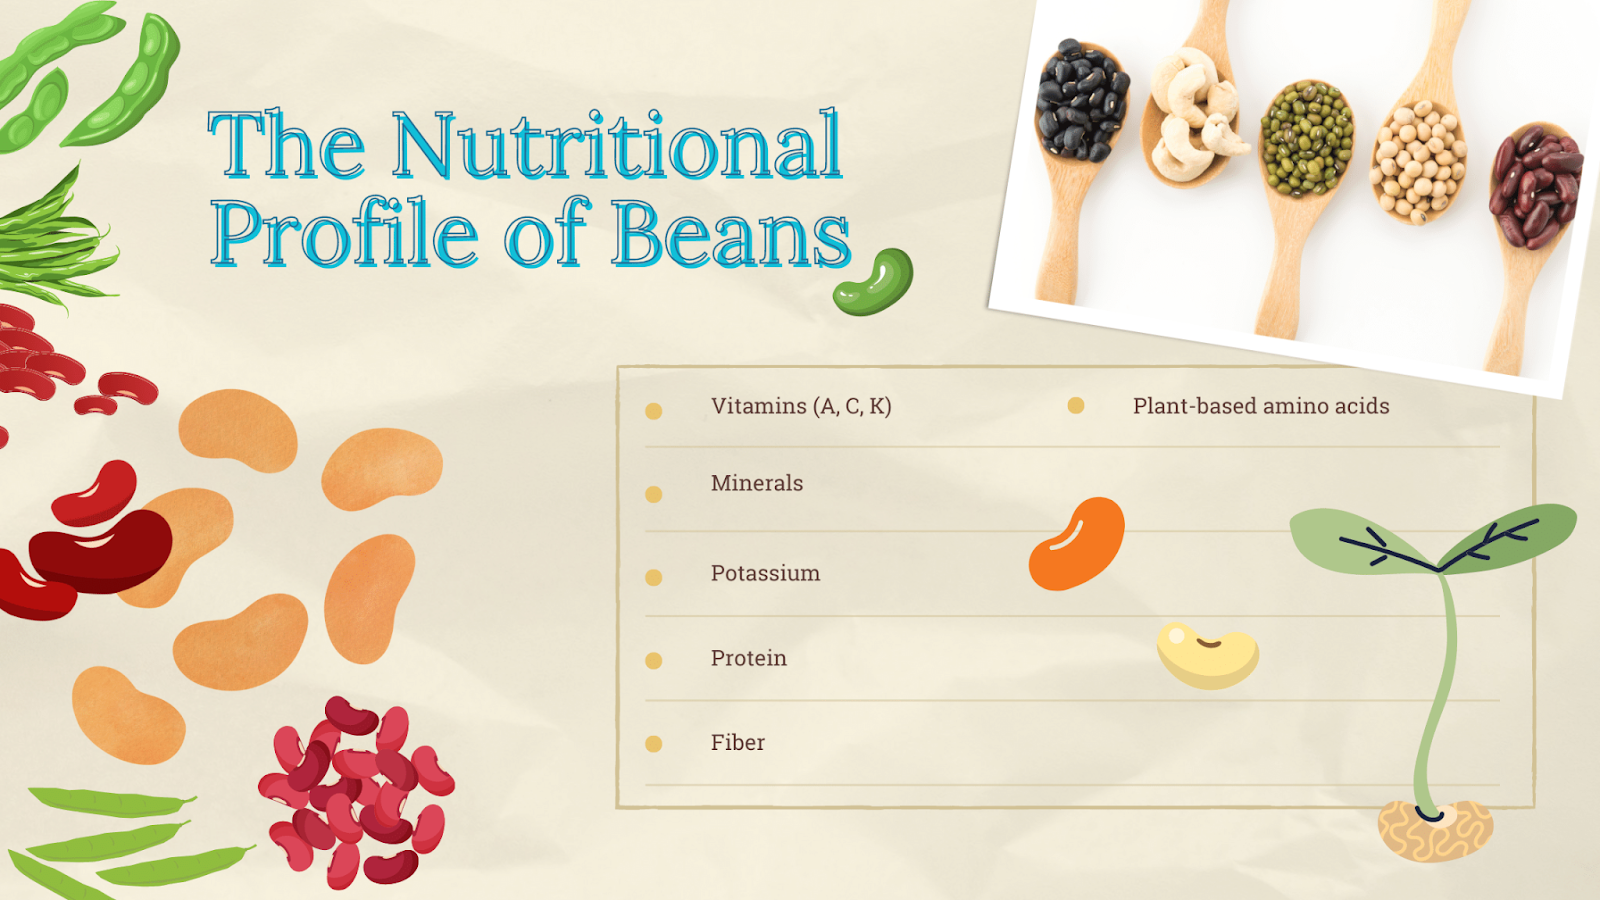 The nutritional profile of beans